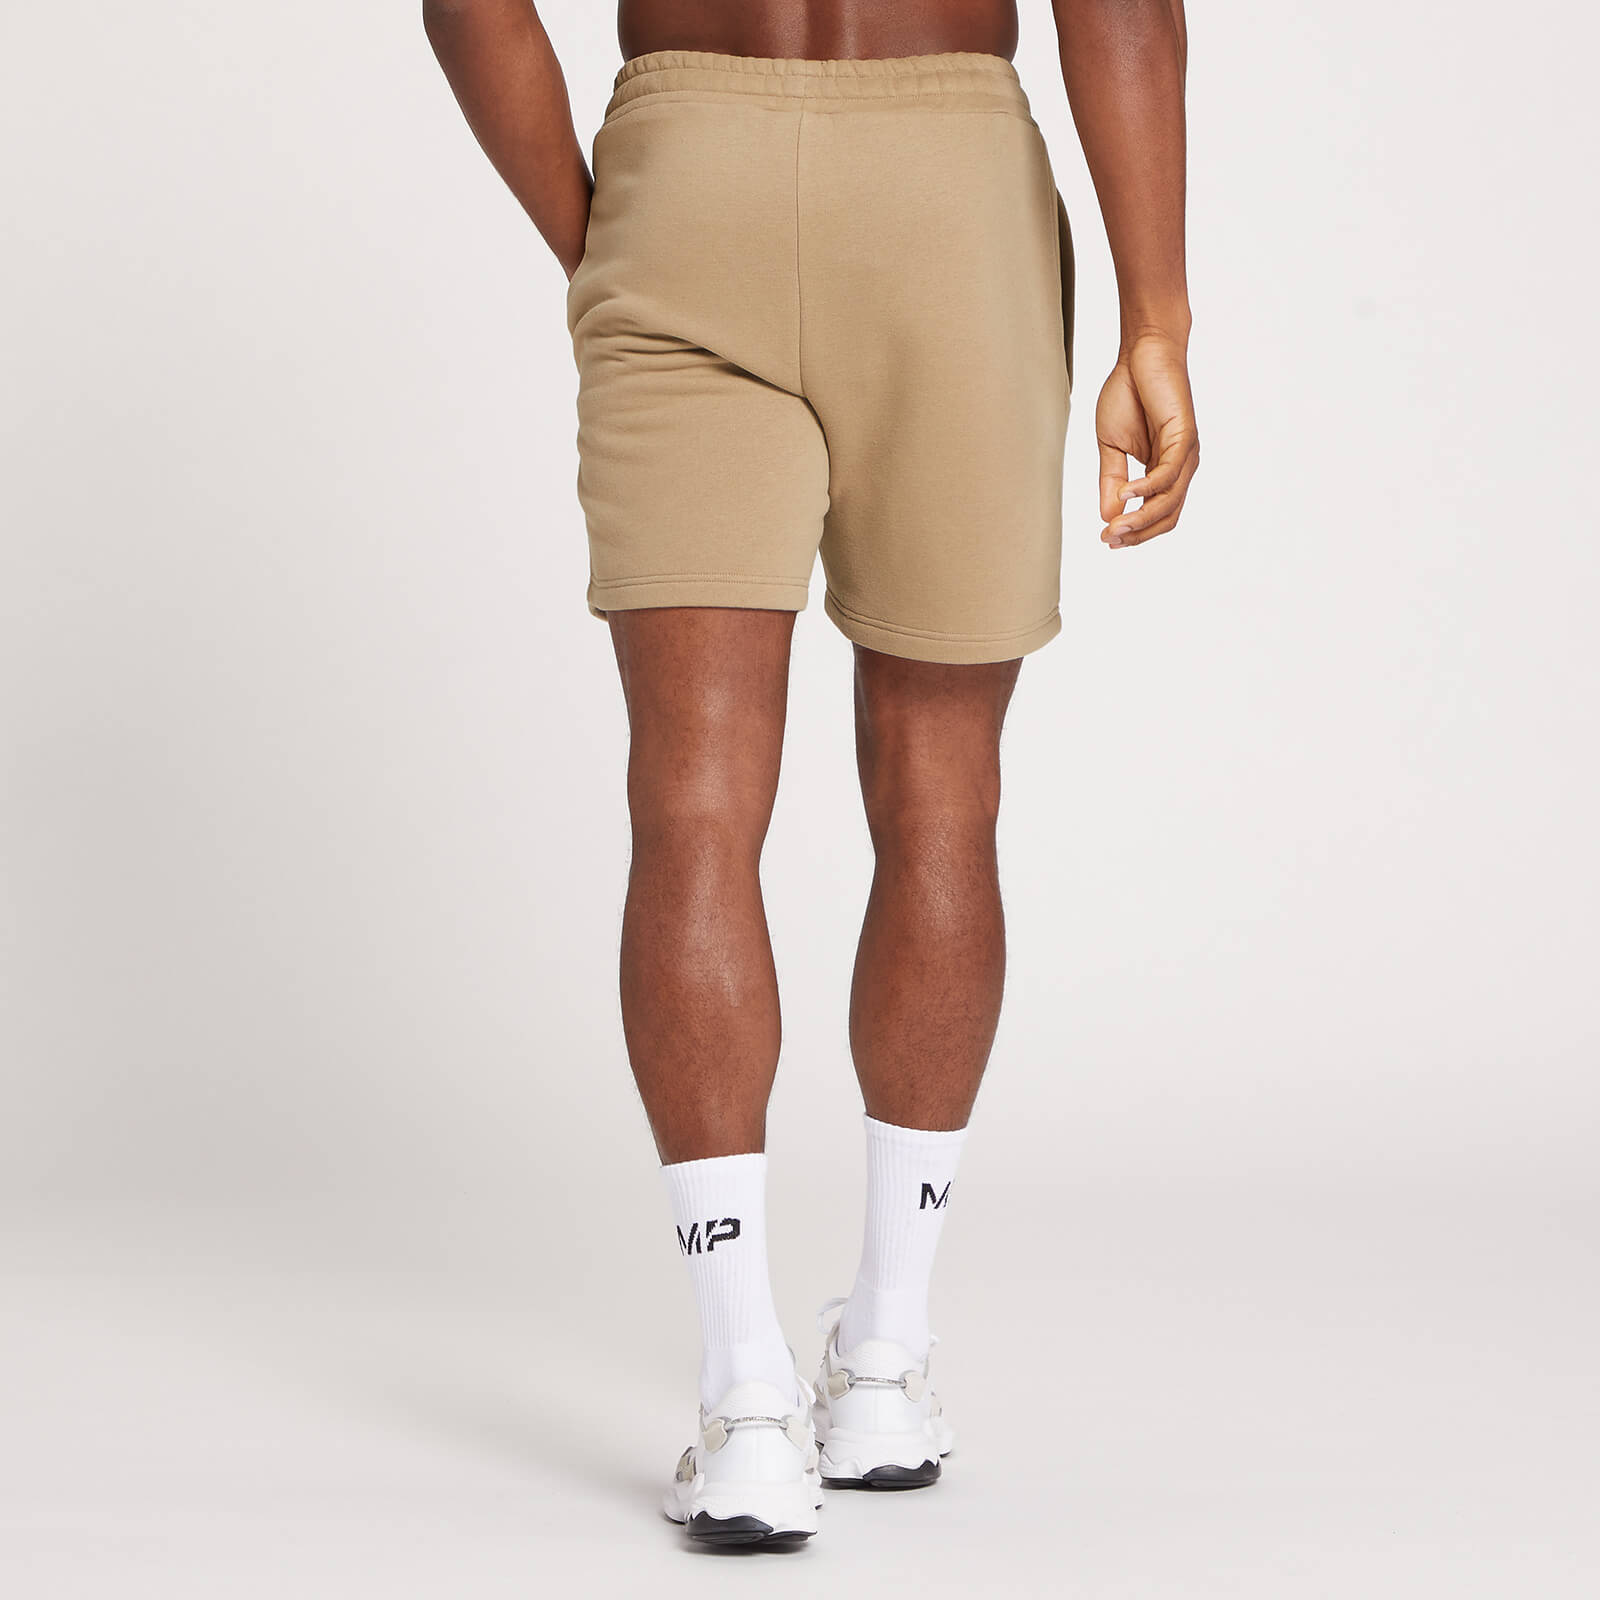 mp men's repeat mp graphic shorts - taupe - xs